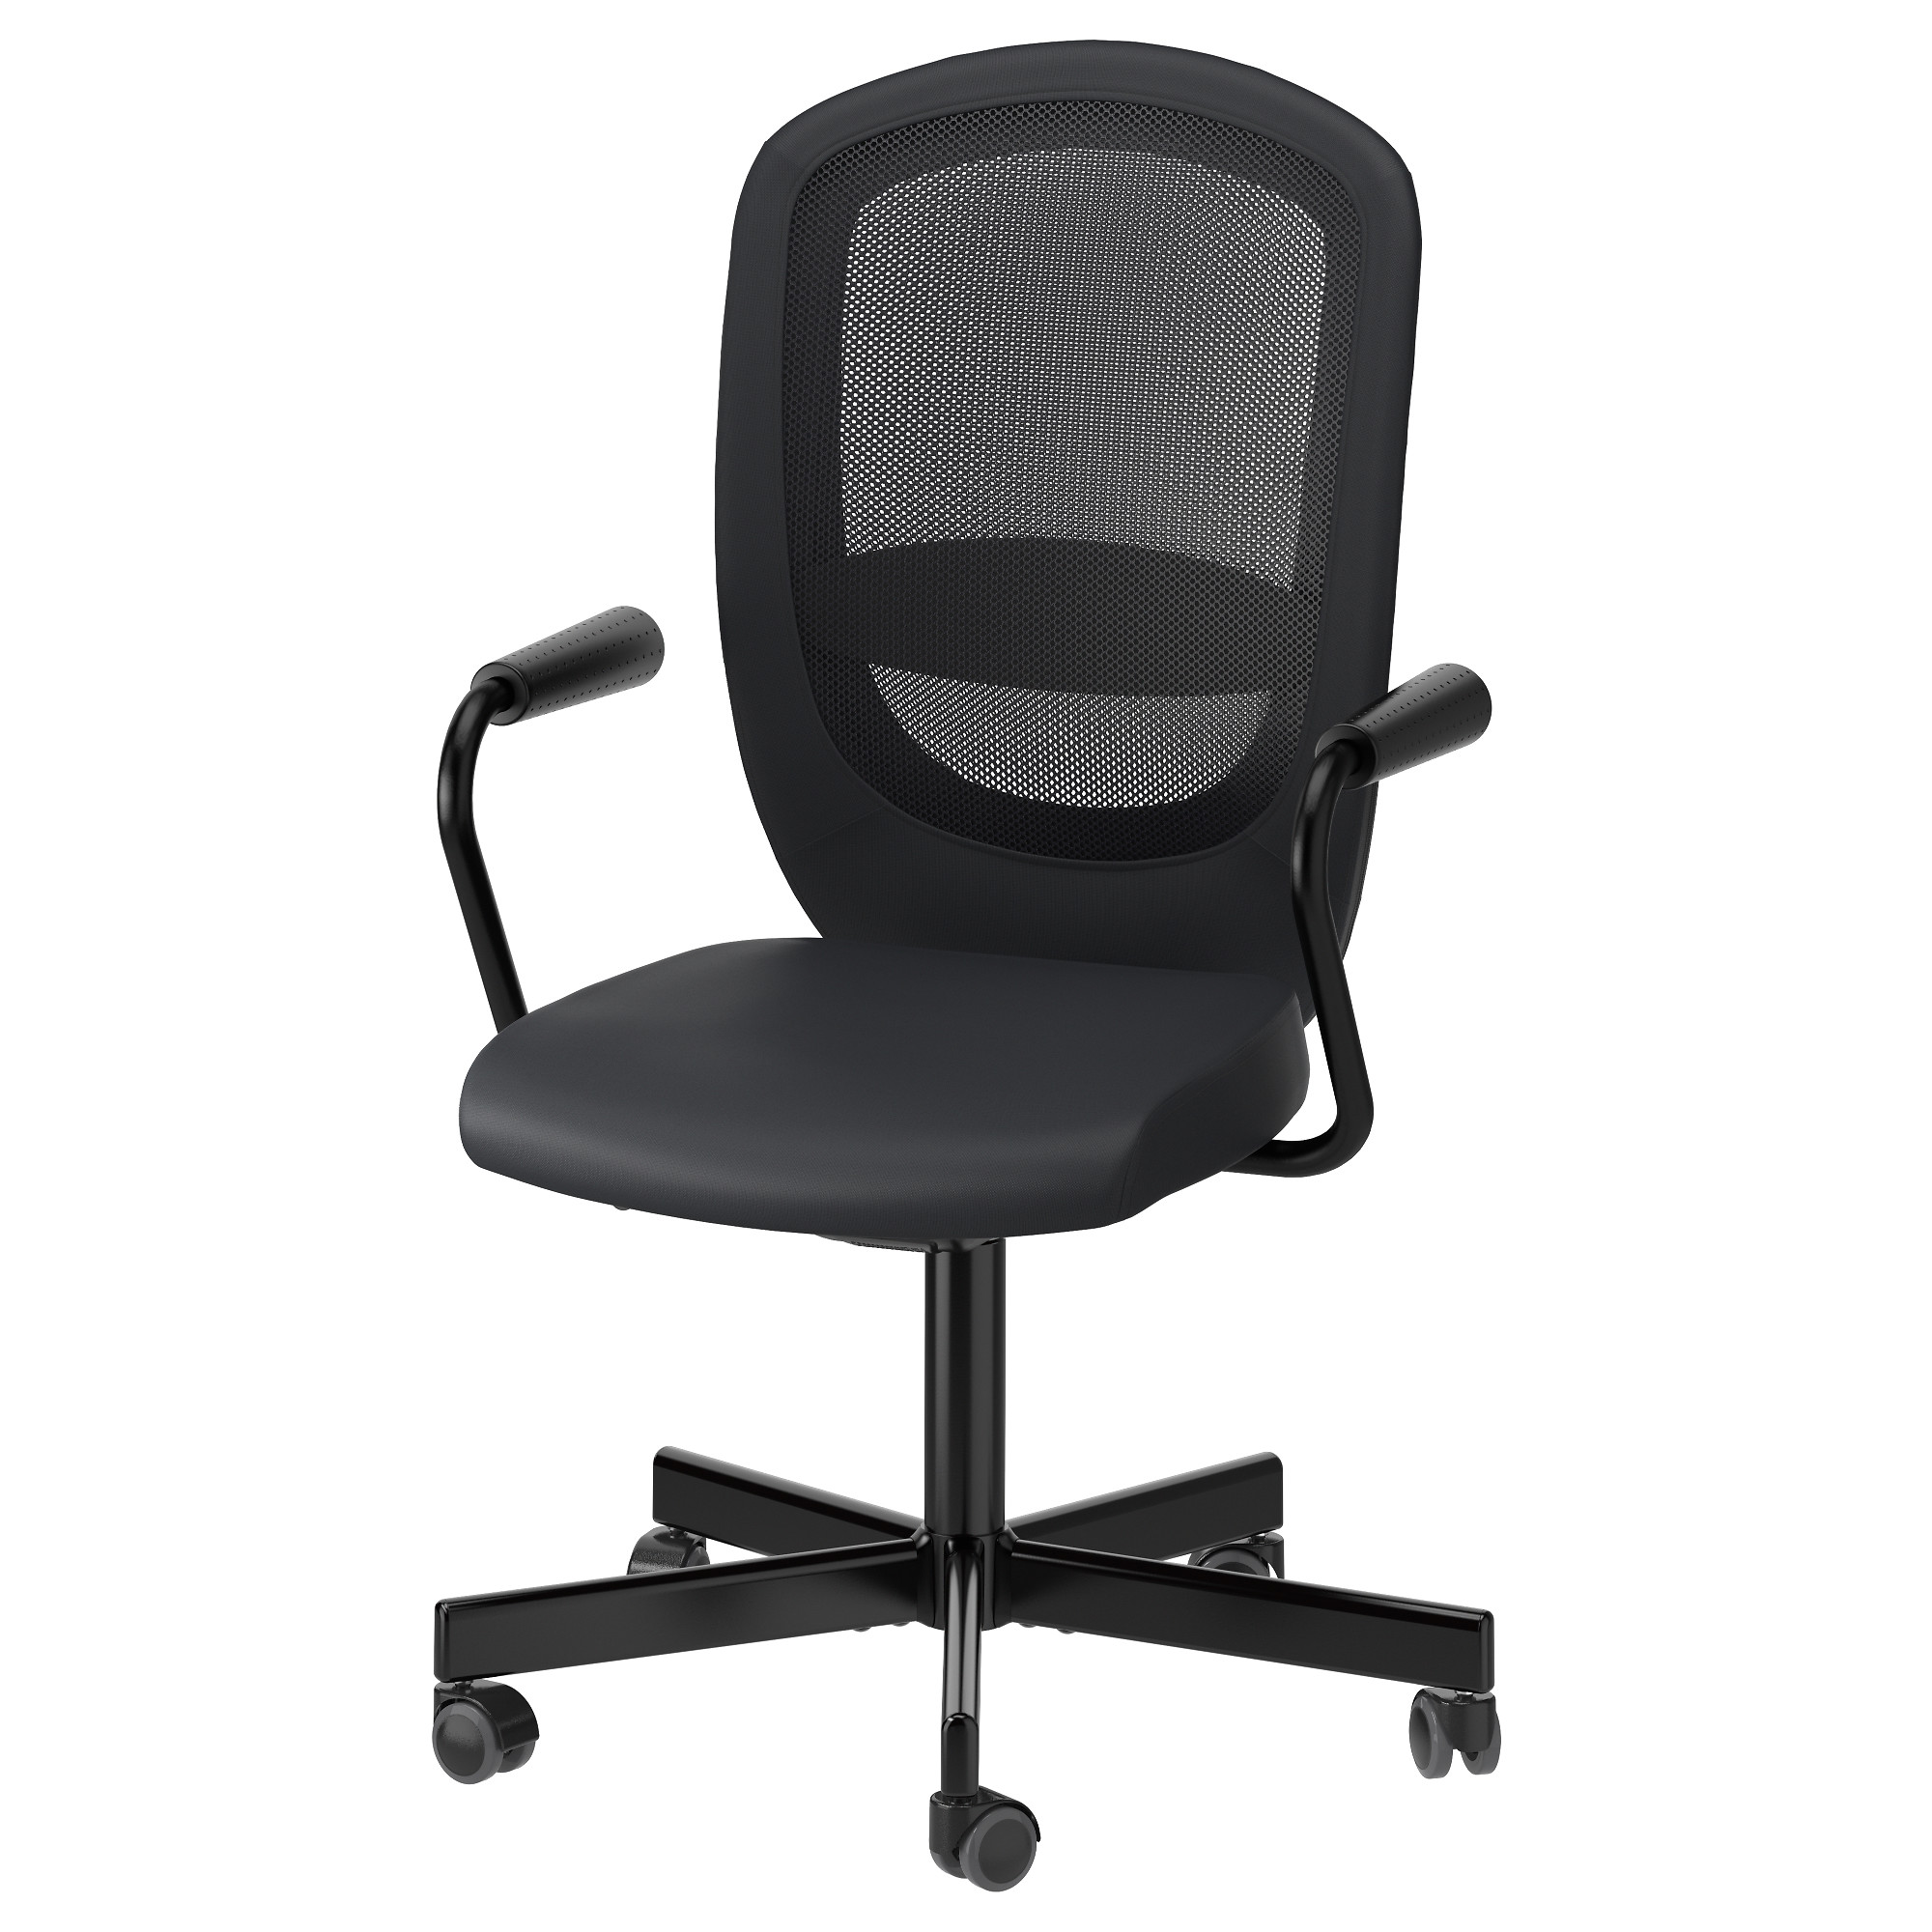 Use of office chairs for your working needs